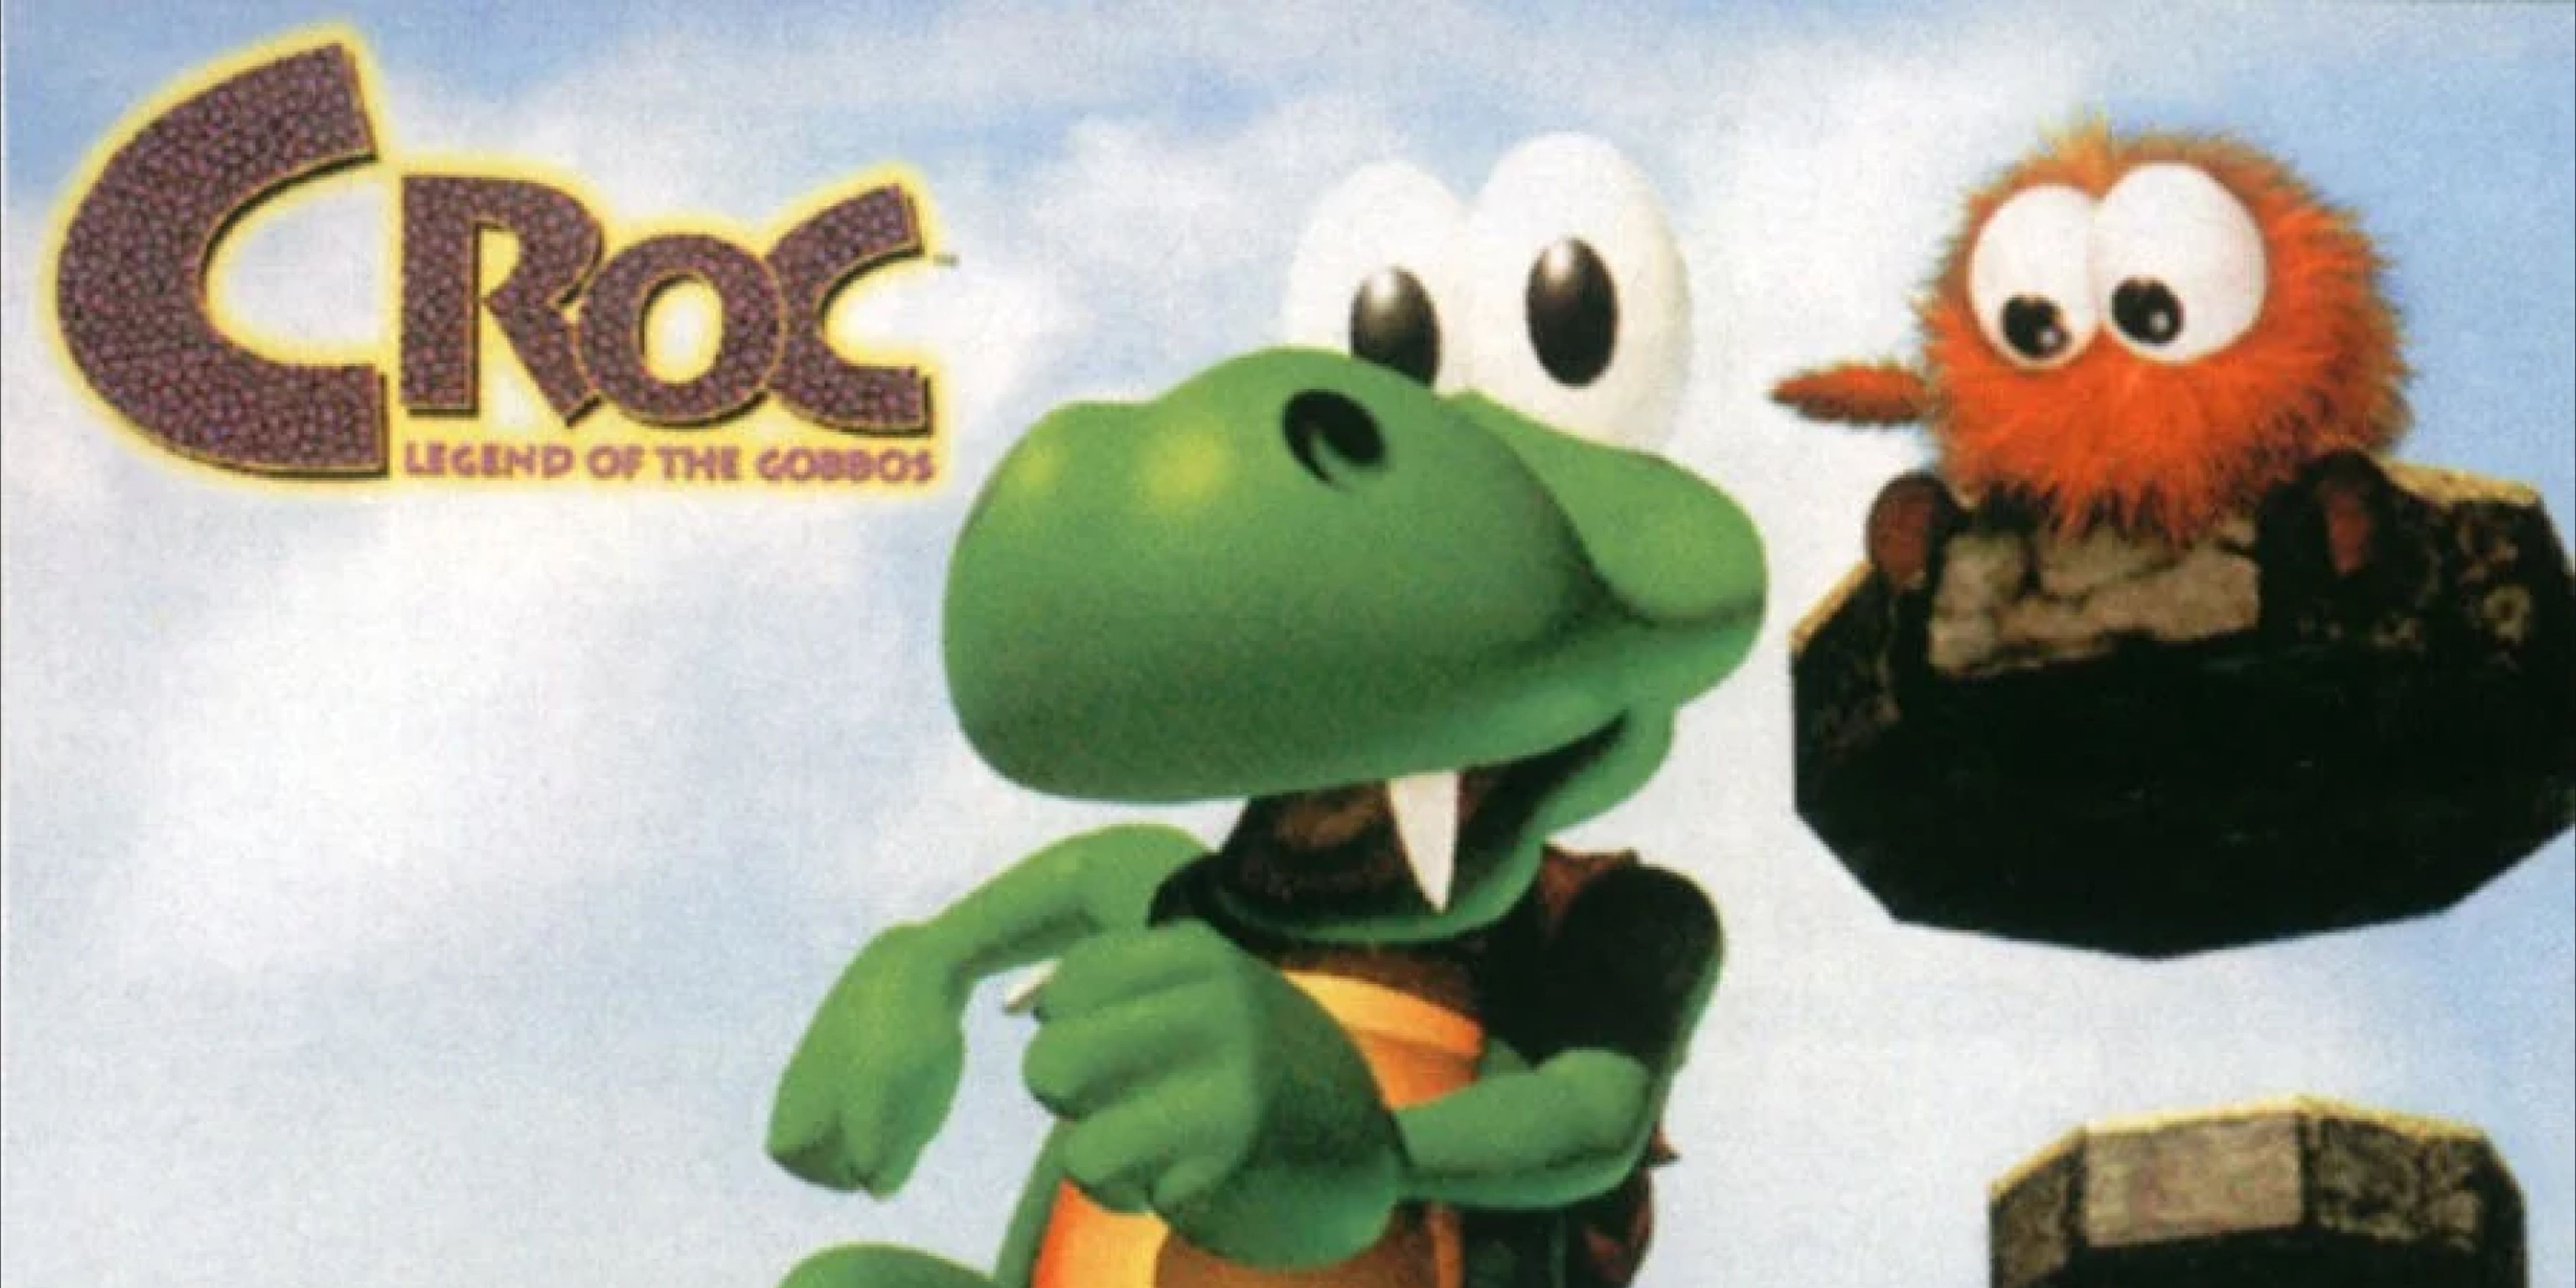 croc-ps1 Cropped (1)